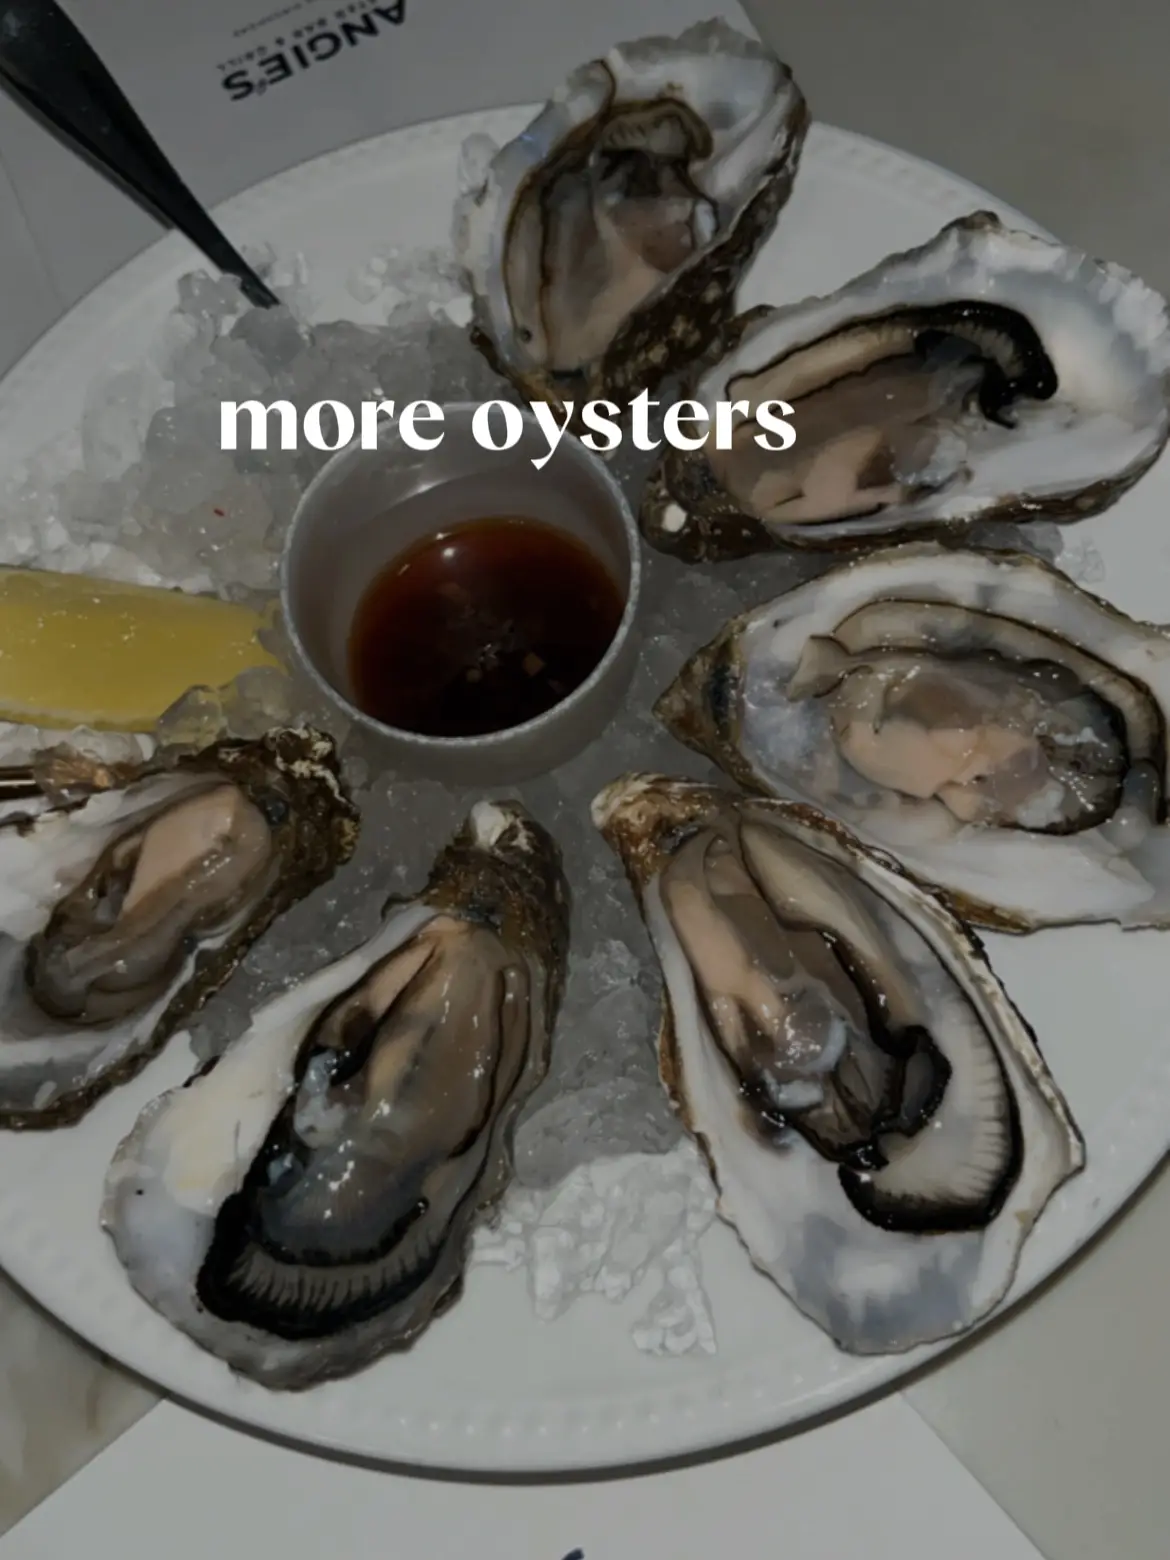 $1.50 OYSTERS AND 1 FOR 1 COCKTAILS?'s images(3)